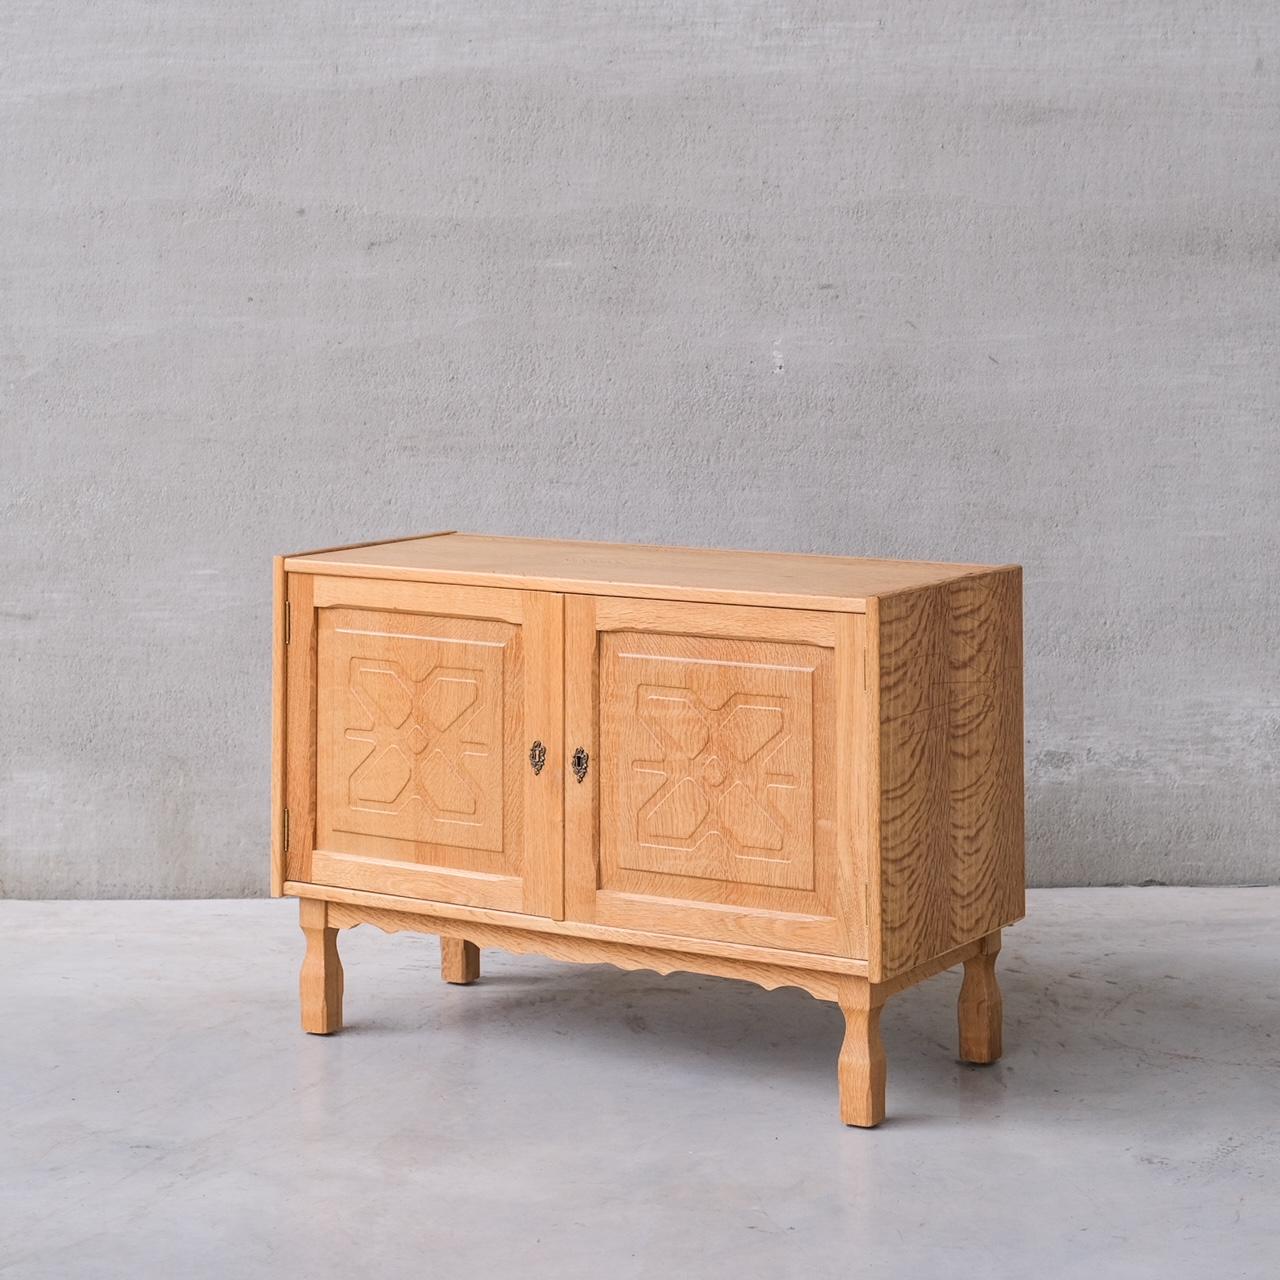 A pair of blonde oak bedside cabinets or small sideboards.

Denmark, c1960s.

Attr. to Henning Kjaernulf.

Price is for the pair.

Good vintage condition, some scuffs and wear commensurate with age.

Internal ref: 18/10/23/037.

Location: Belgium